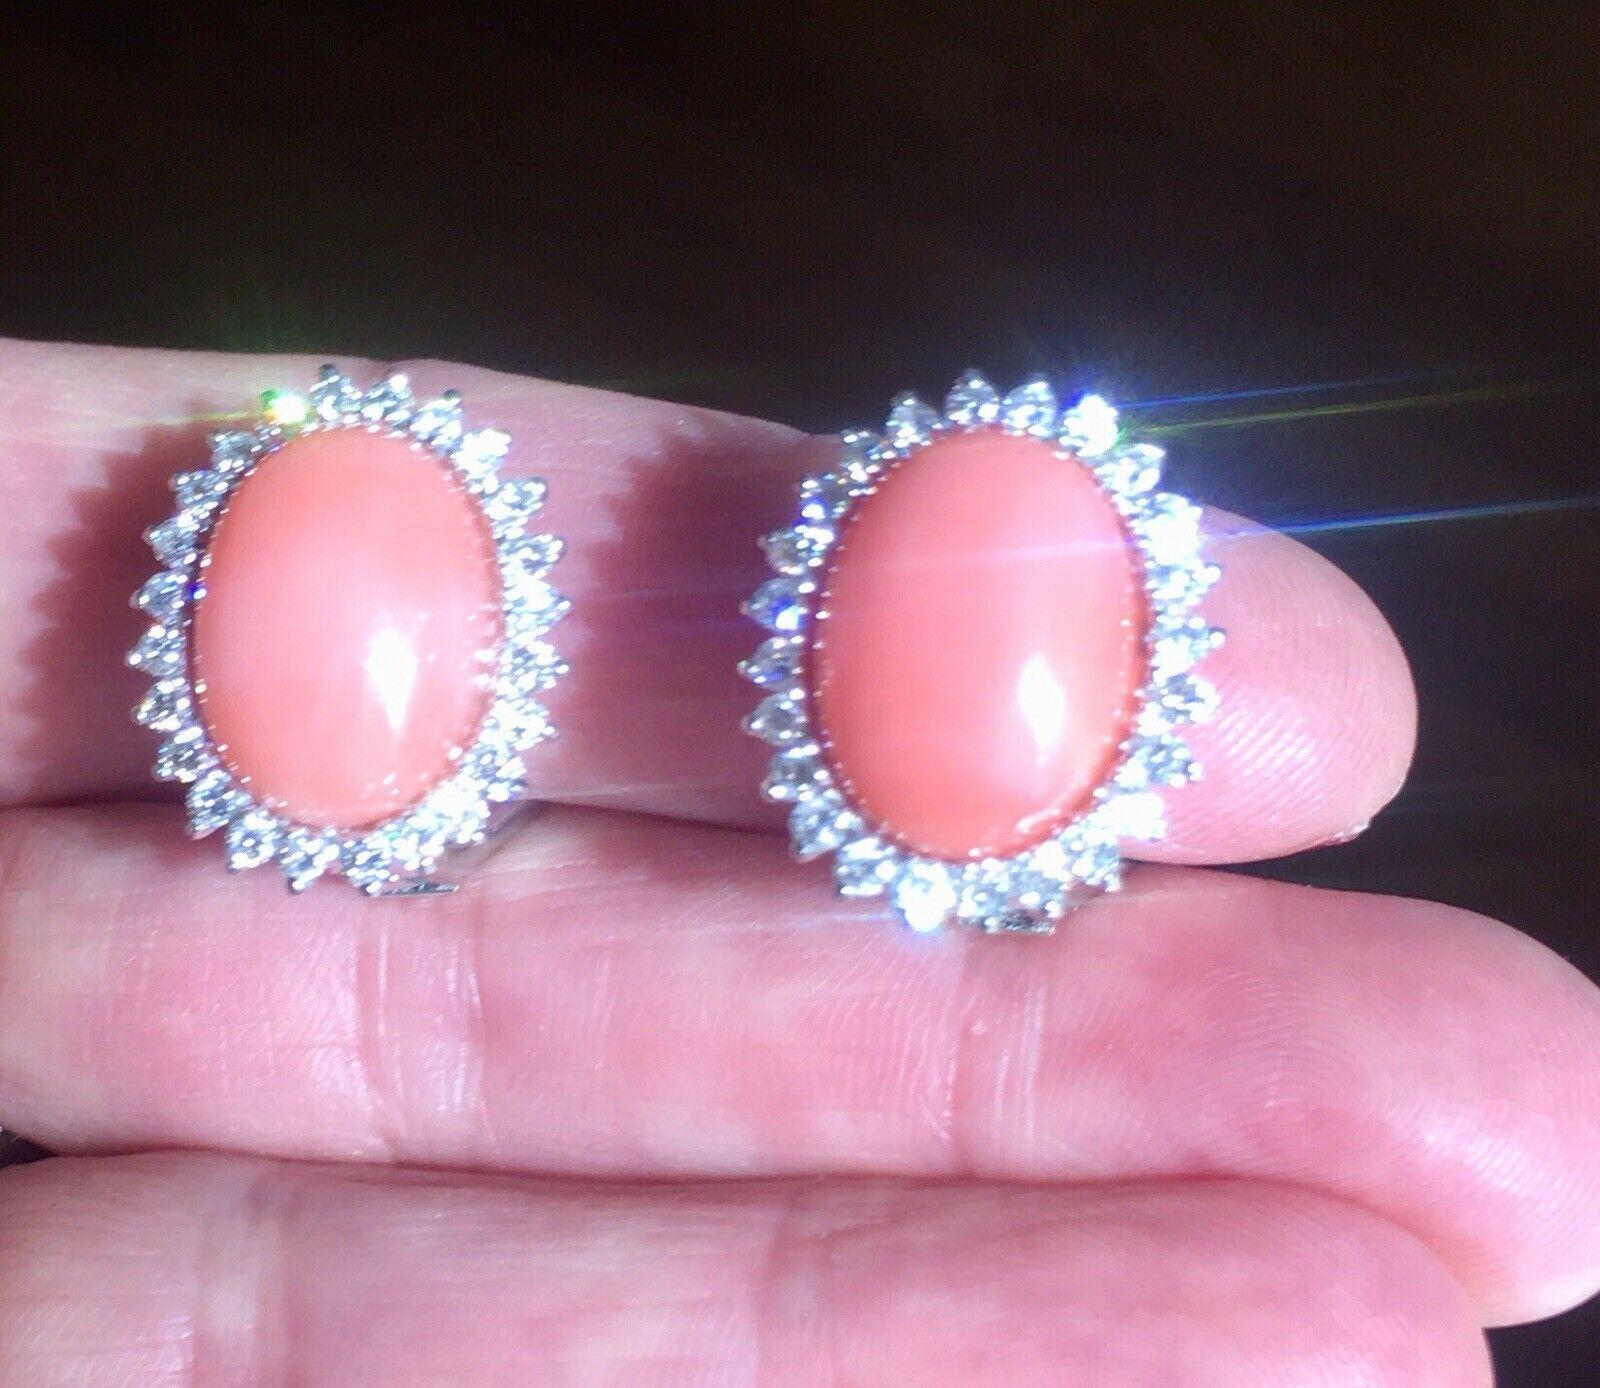 These gorgeous stud/drop earrings feature two salmon peach coral cabochons, each measuring measuring 16mm x 12mm and each set with a stunning halo of diamonds totaling 1.10 carats of G-H color and VS clarity.

The earrings measure 20m long by 17mm